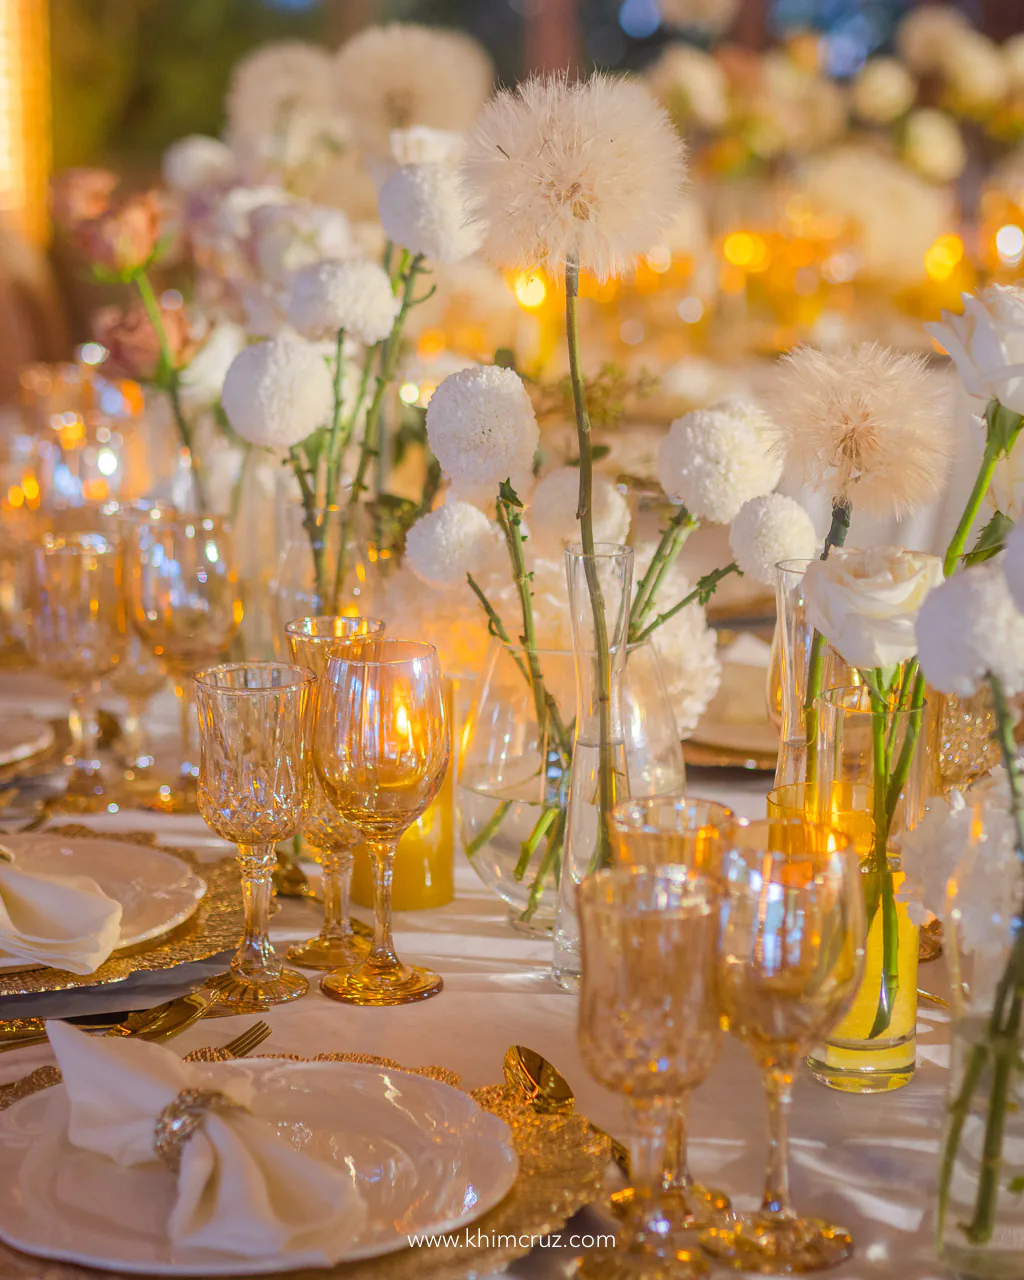 warm glow of candles accompanied beautifully arranged floral centerpieces for wedding reception